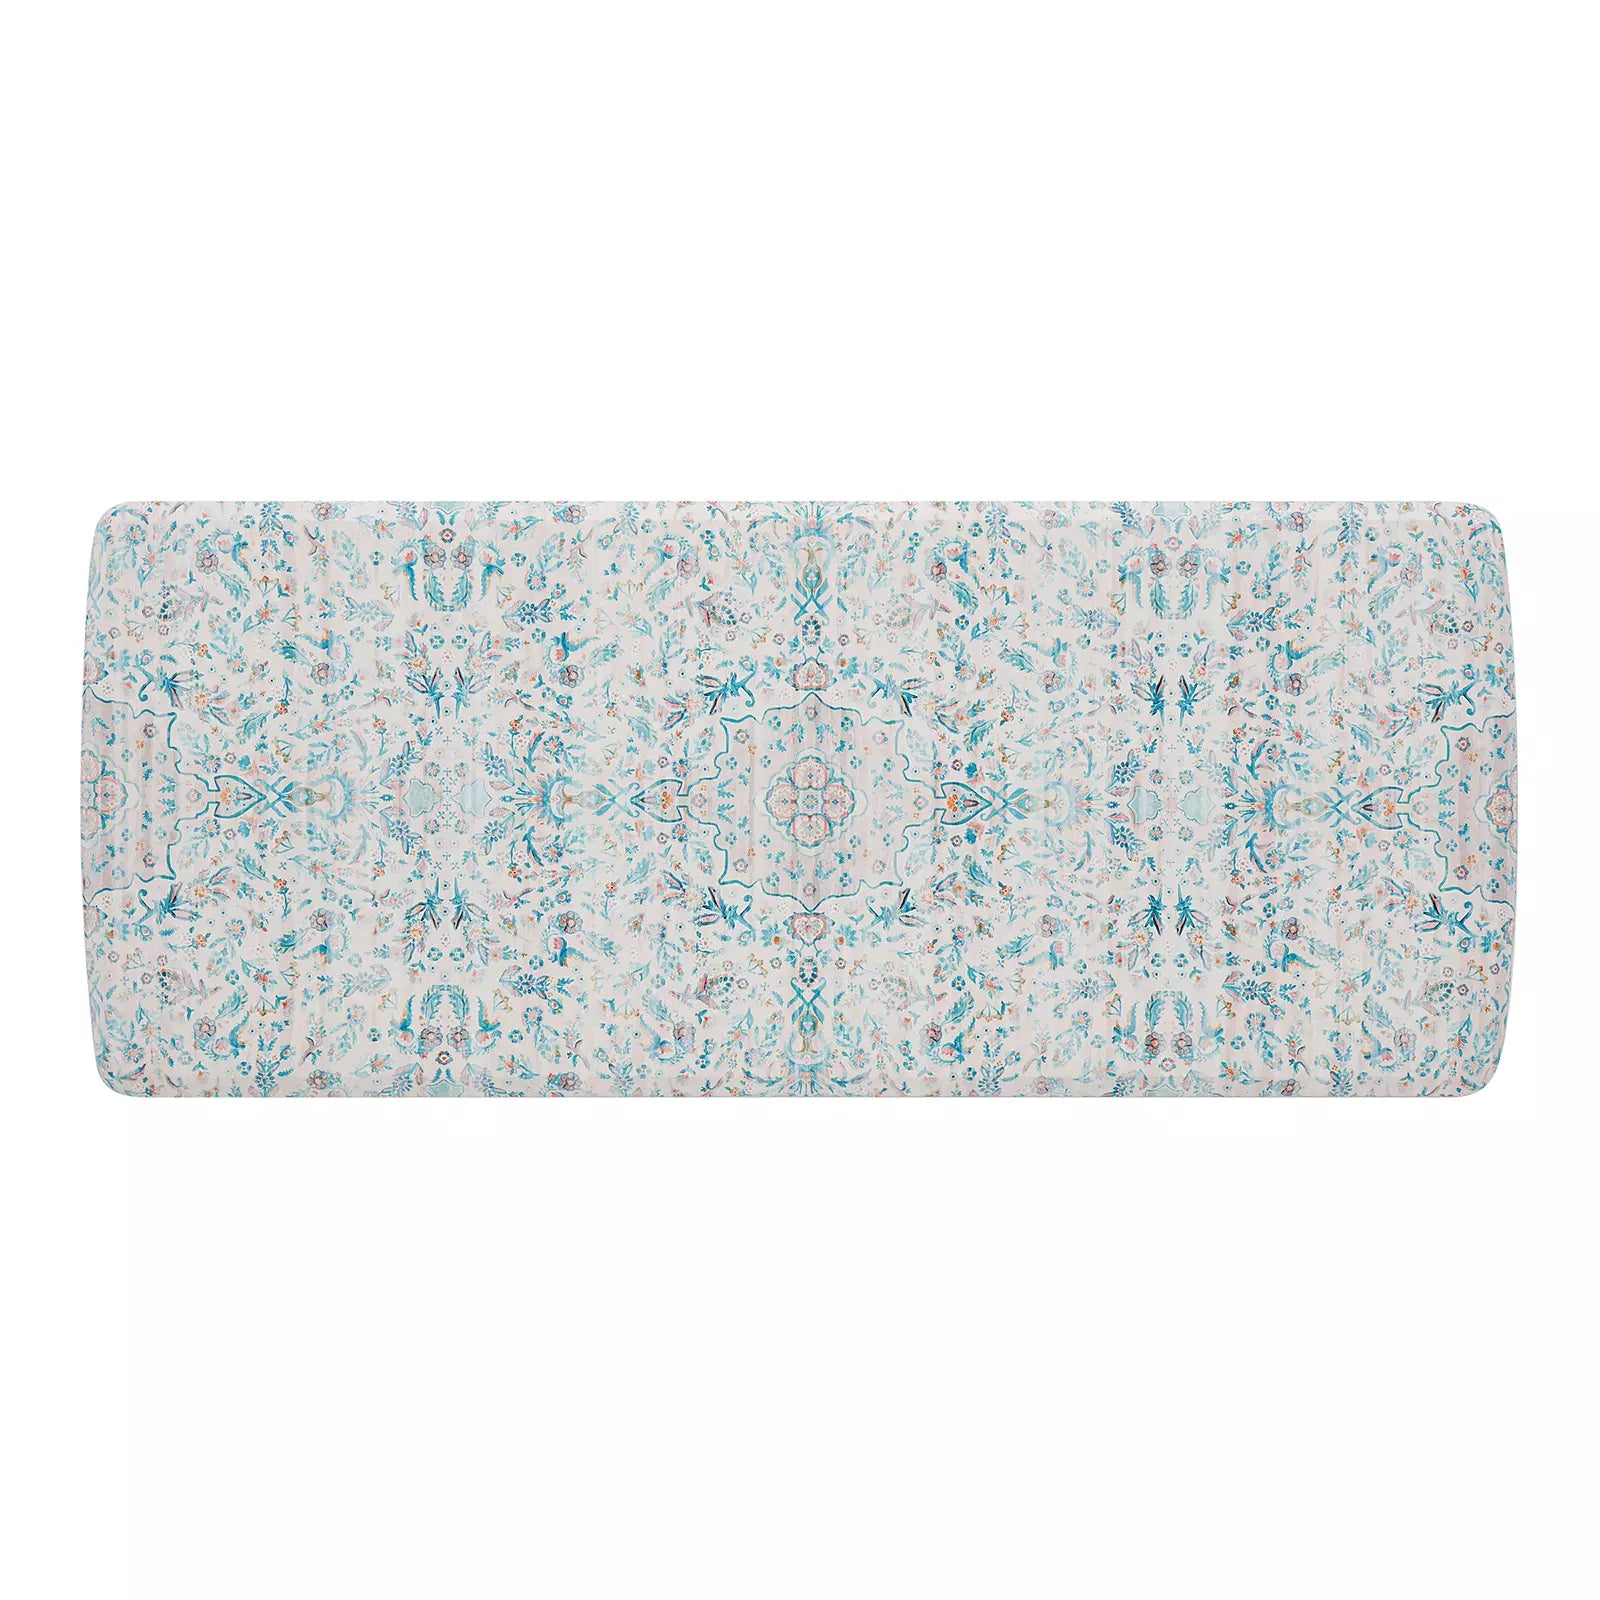 Emile Pale Aqua Muted Blue Pink Floral Boho Standing Mat shown in size 30x72